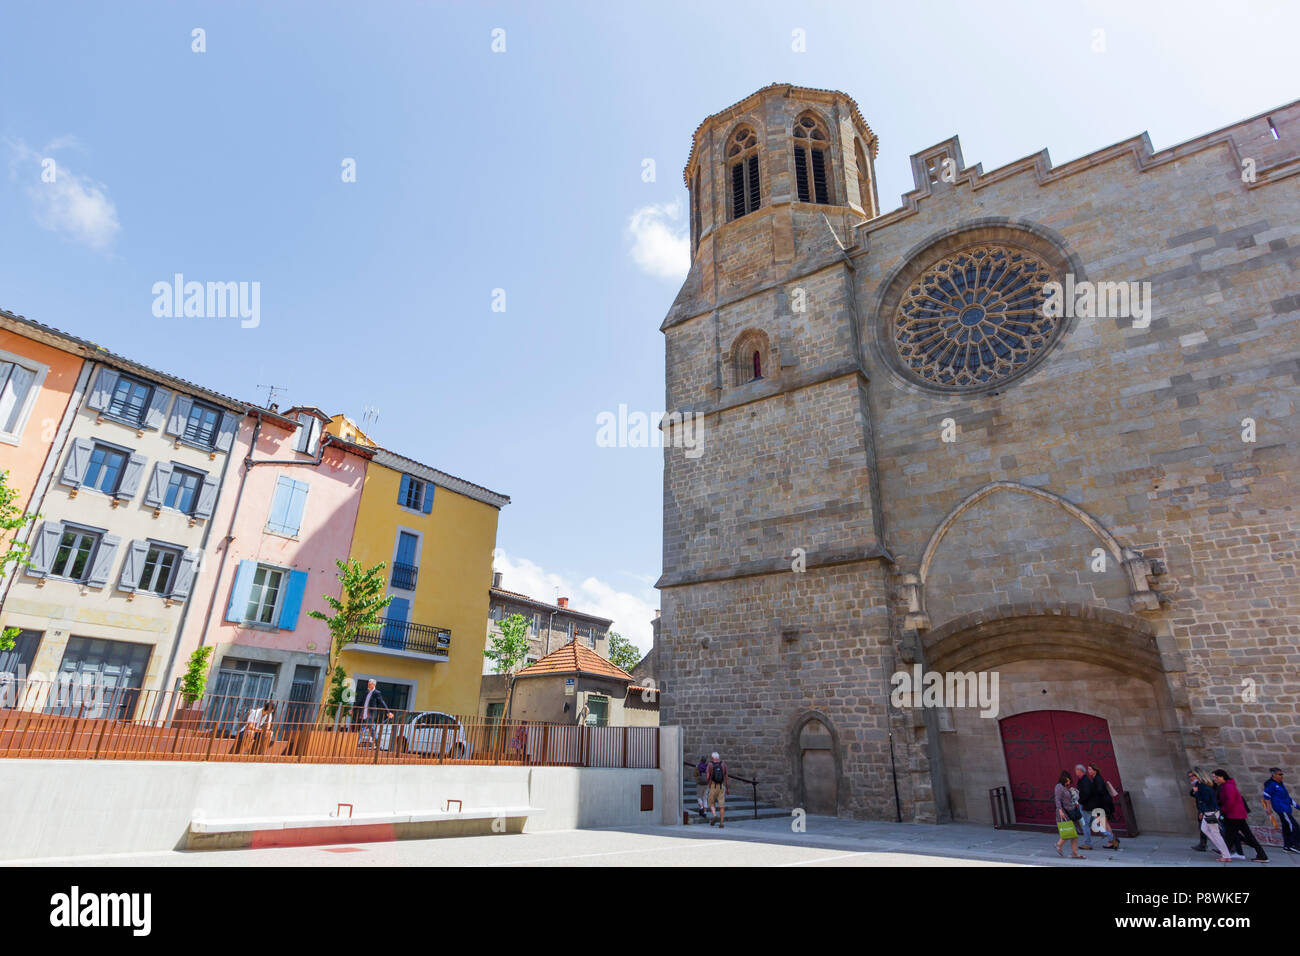 Cathedral of Saint Michael of Carcassonne, French department of Aude, Occitanie Region, France. Stock Photo